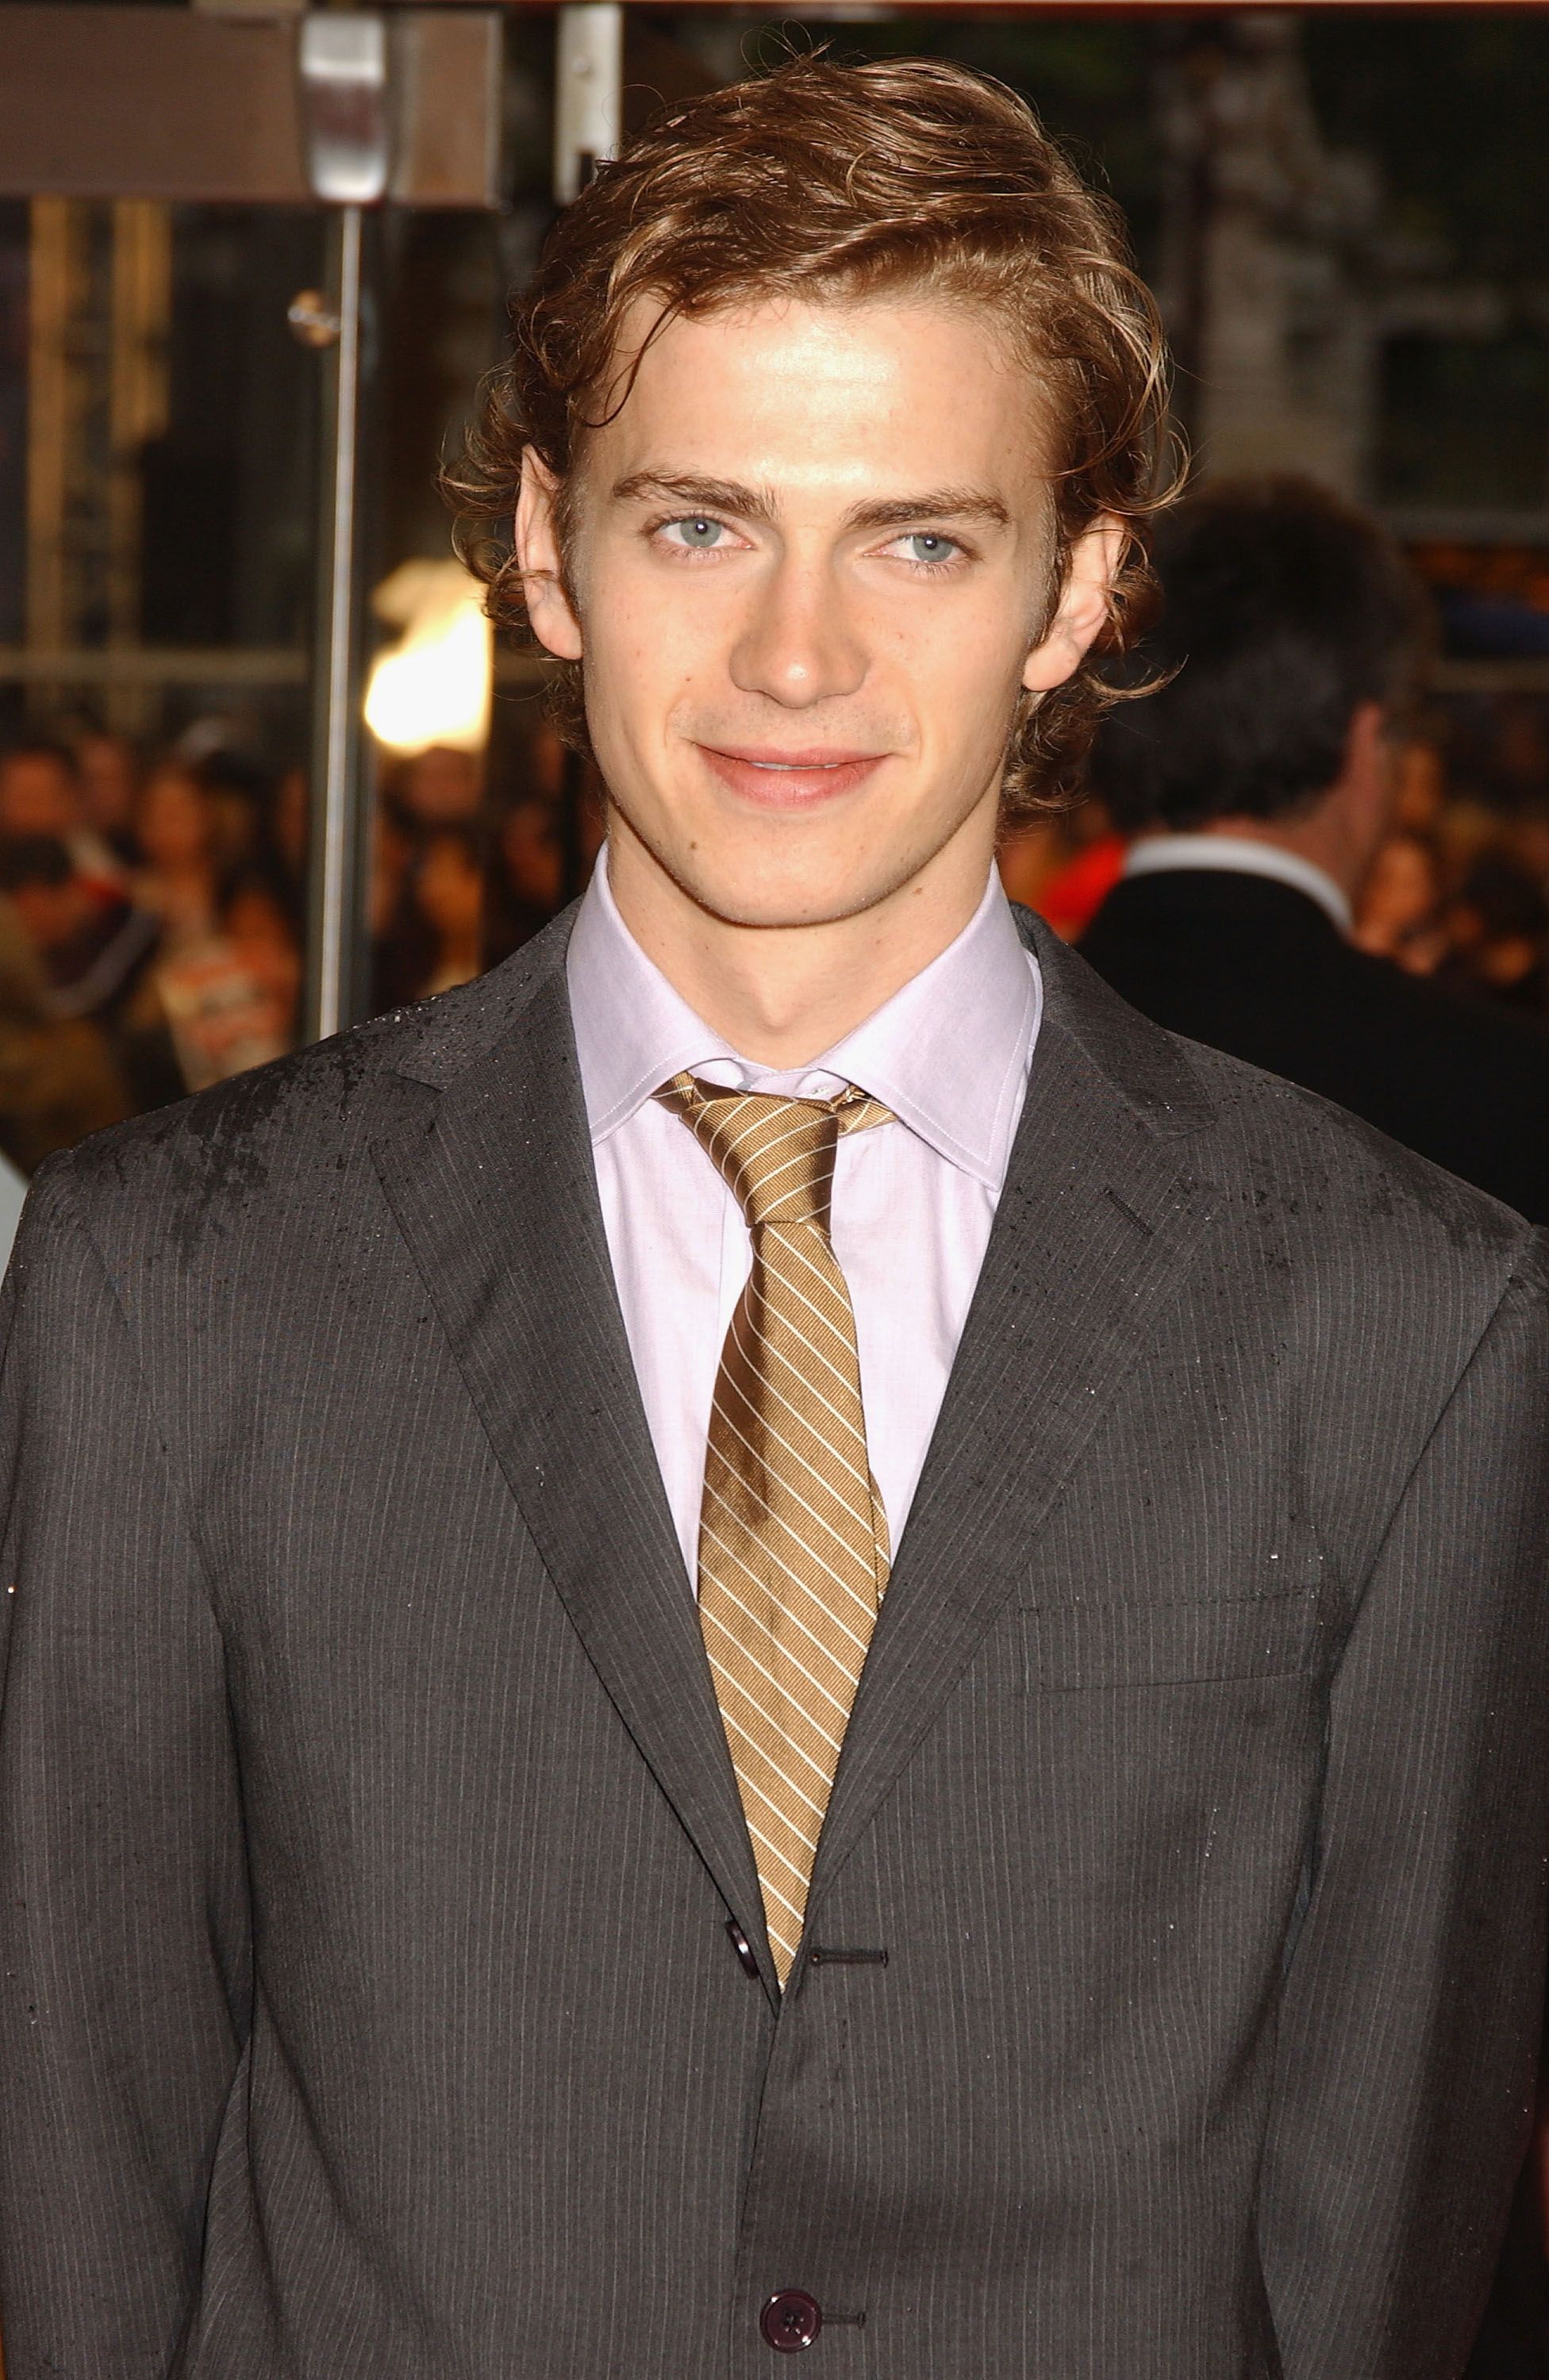 Hayden Christensen during the UK Premiere of "Star Wars Episode III: Revenge Of The Sith" at Odeon Leicester Square on May 16, 2005 in London | Source: Getty Images